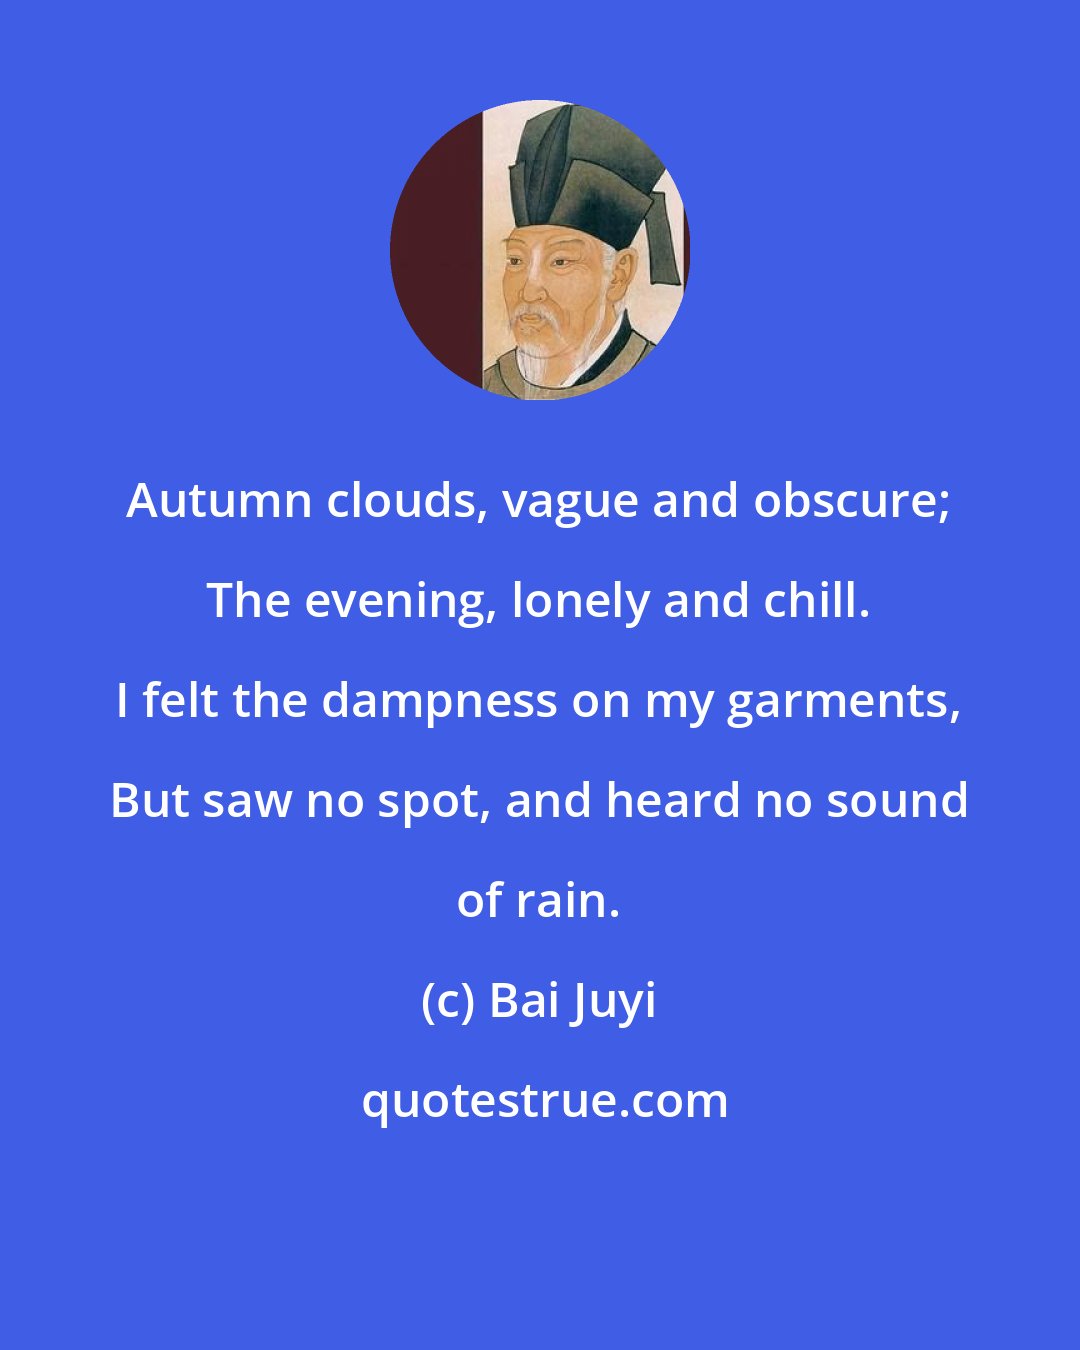 Bai Juyi: Autumn clouds, vague and obscure; The evening, lonely and chill. I felt the dampness on my garments, But saw no spot, and heard no sound of rain.